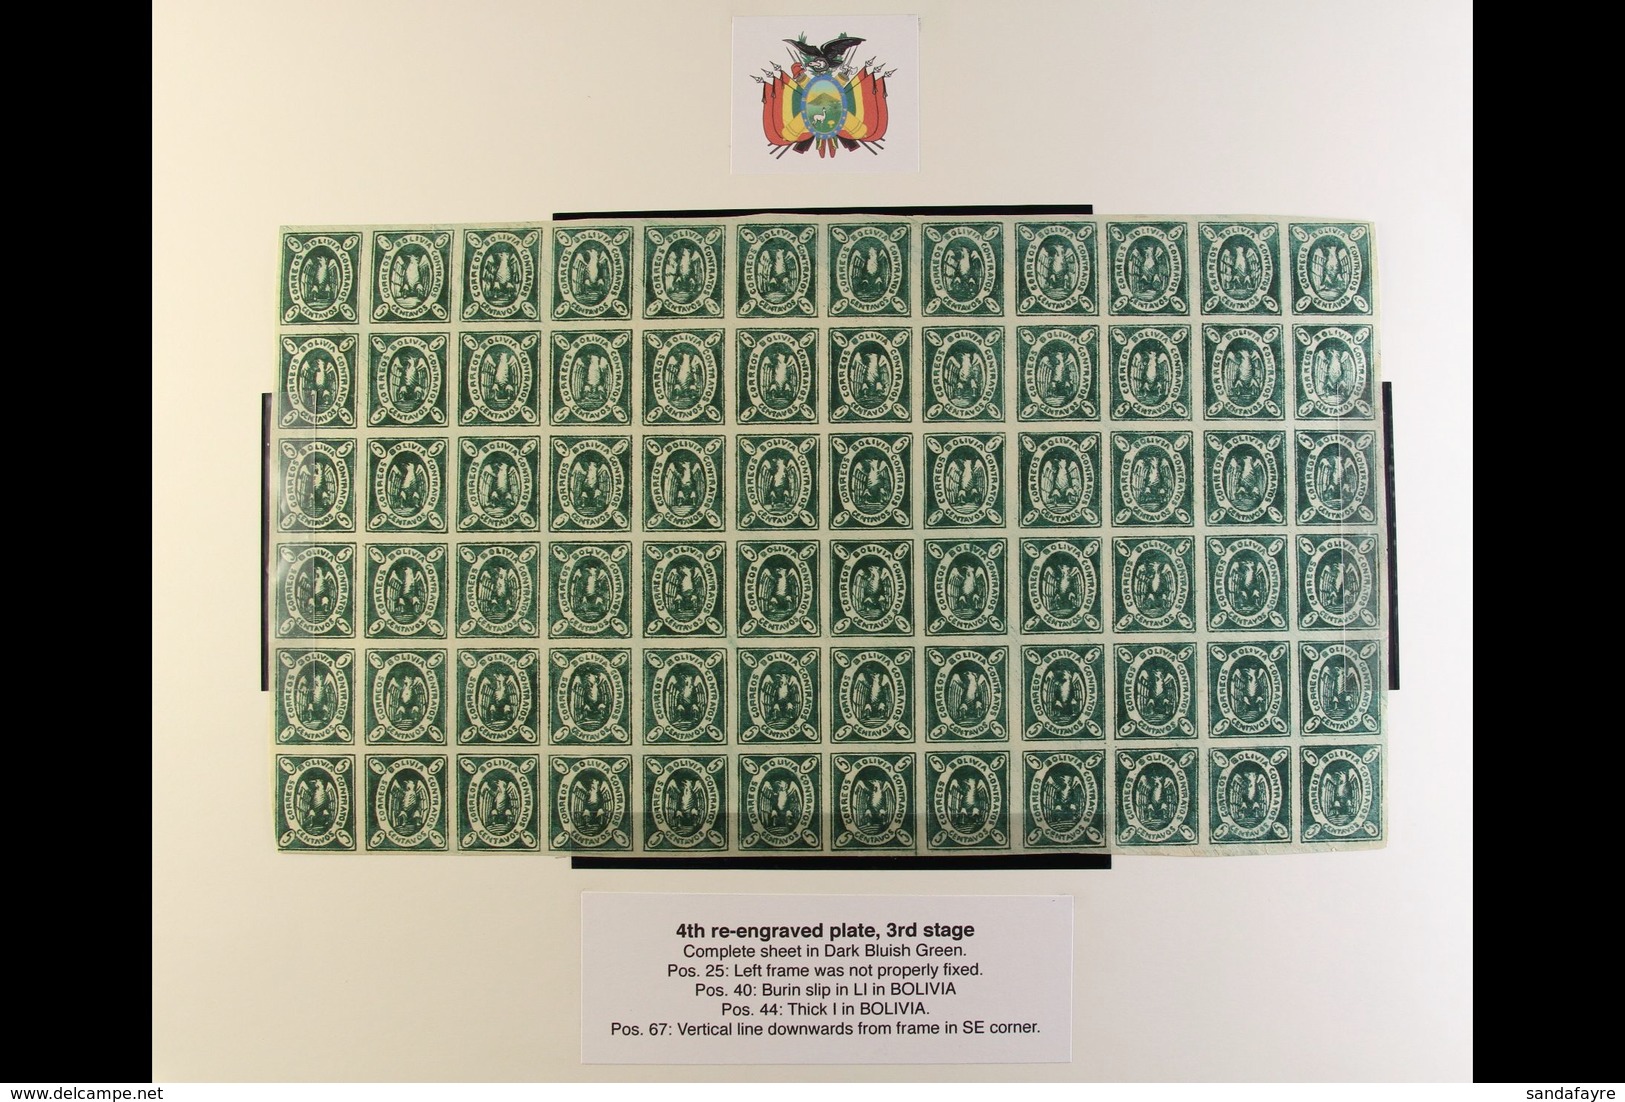 1867-68 5c Dark Bluish Green Condor COMPLETE MINT SHEET Of The 4th Re-engraved Plate Of The 3rd Stage, Lovely Fresh Cond - Bolivia